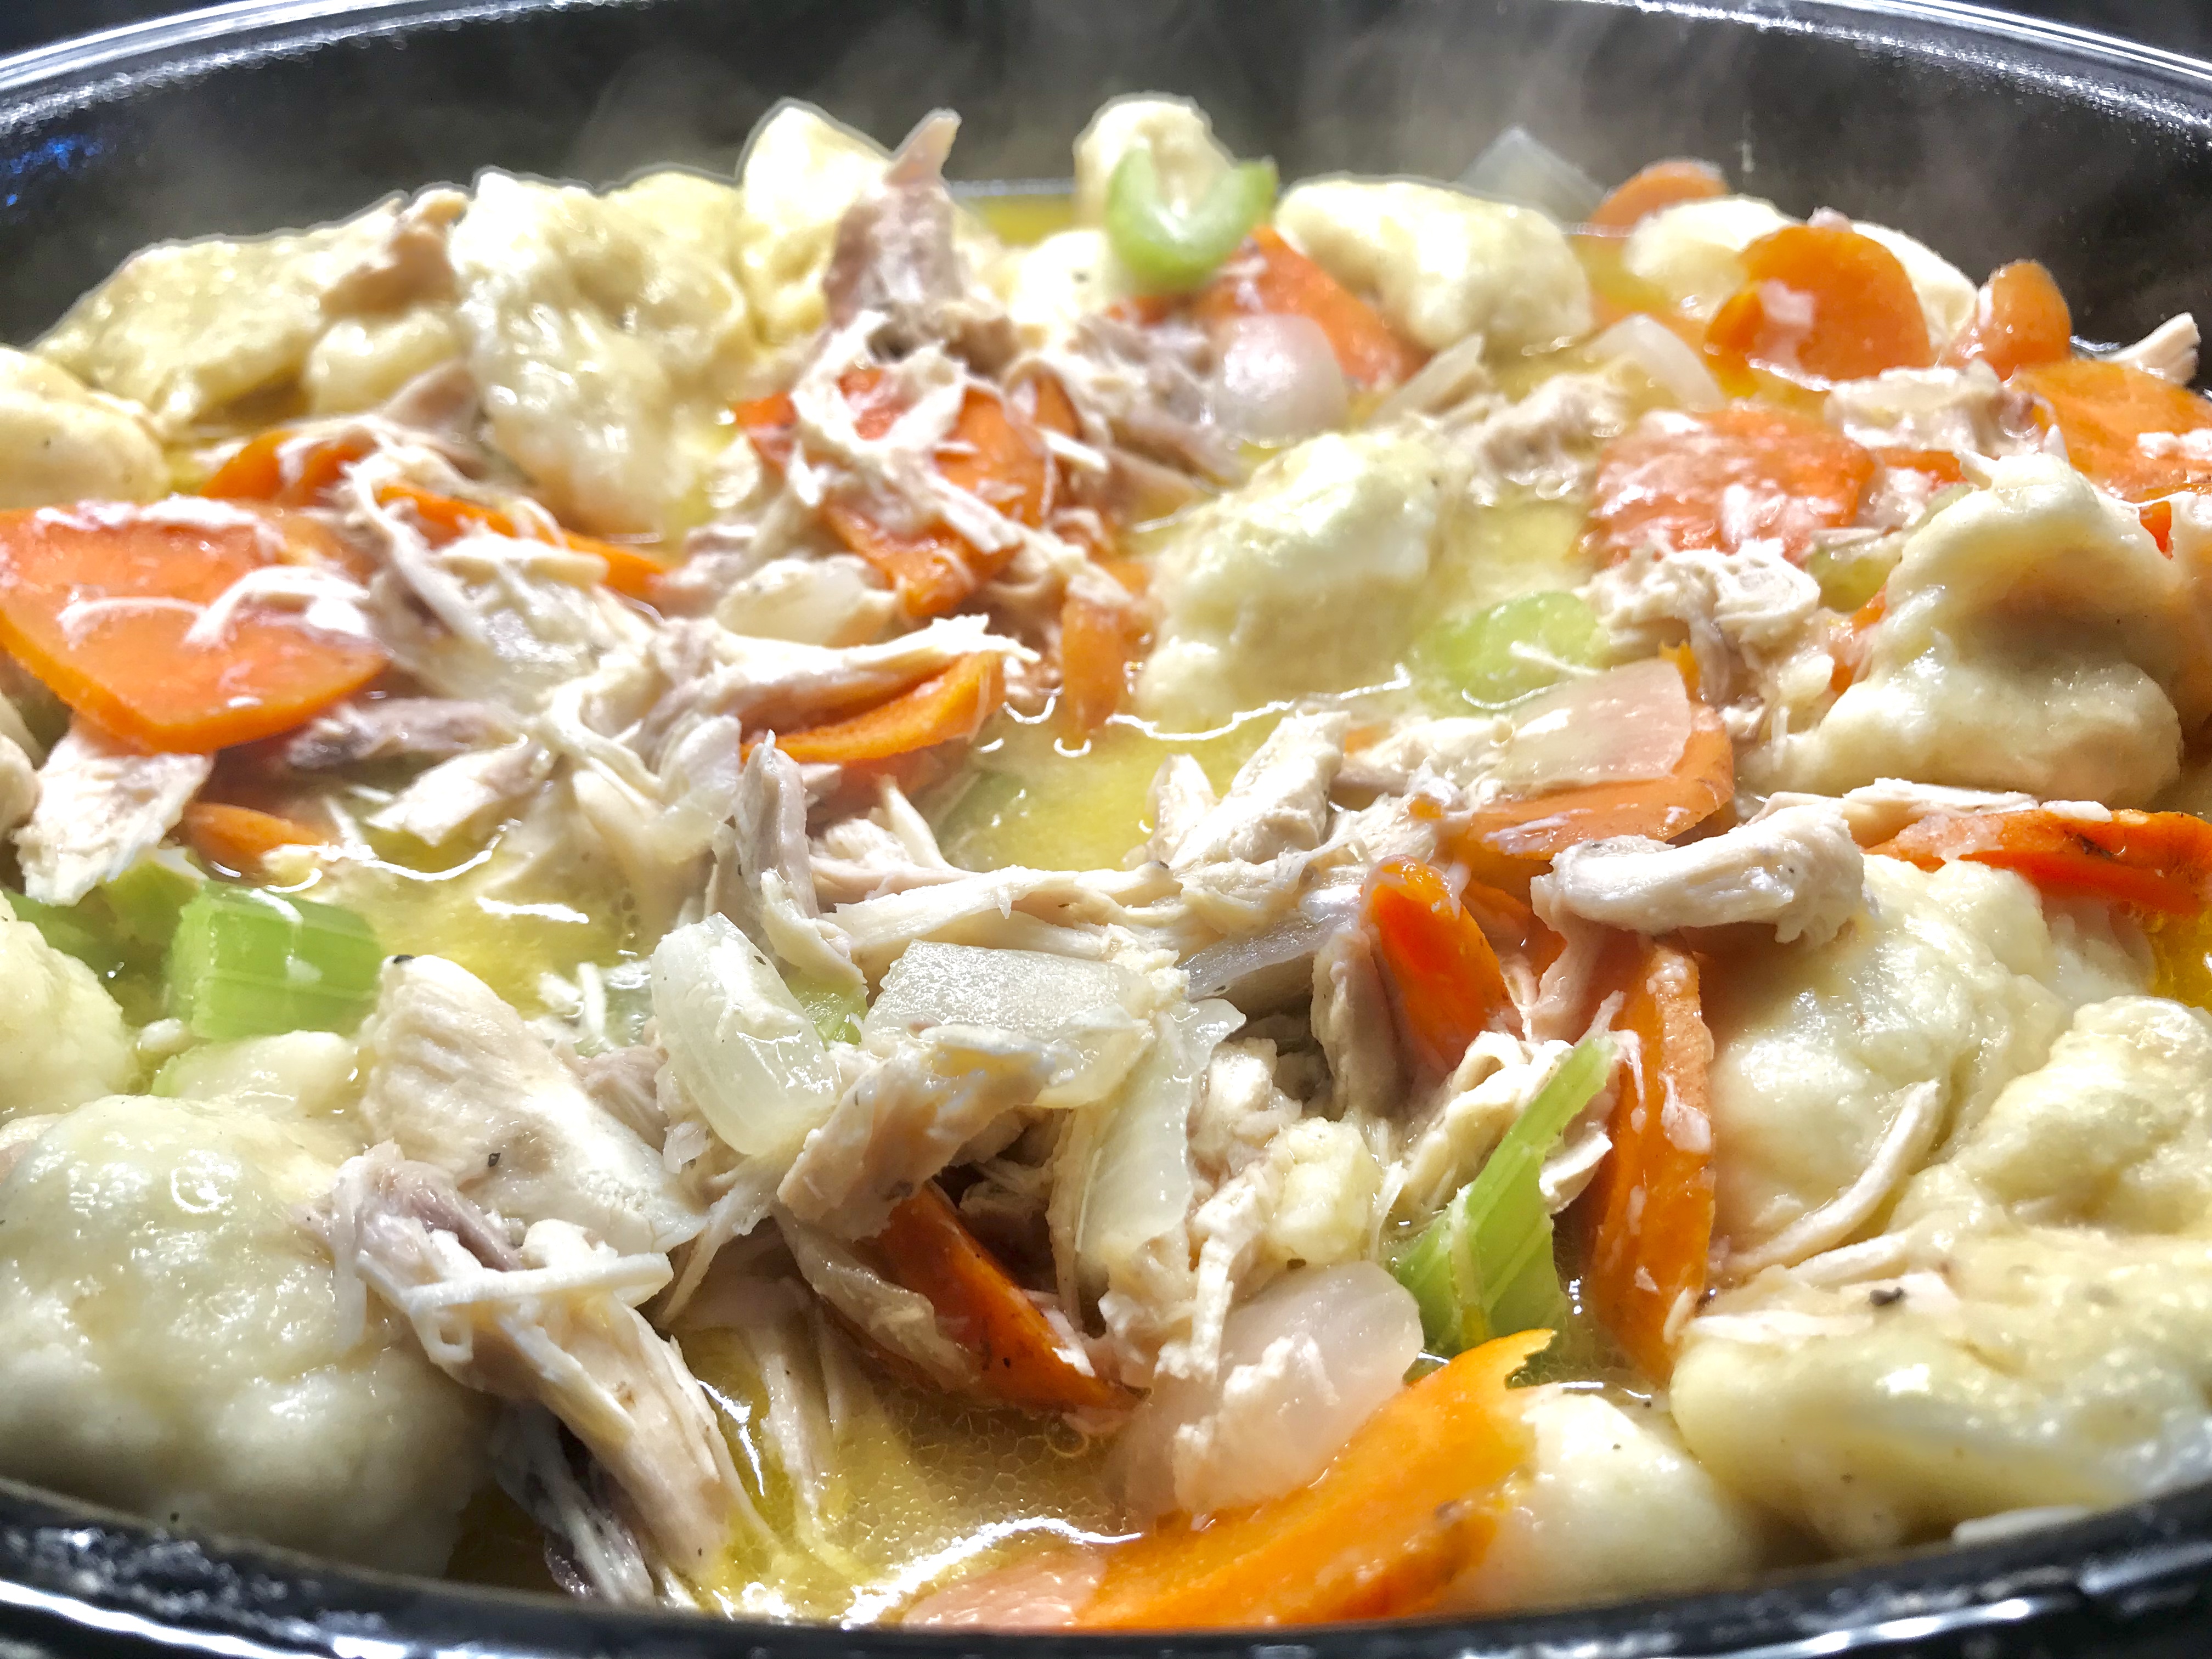 Old Fashioned Chicken and Dumplings Recipe | Allrecipes